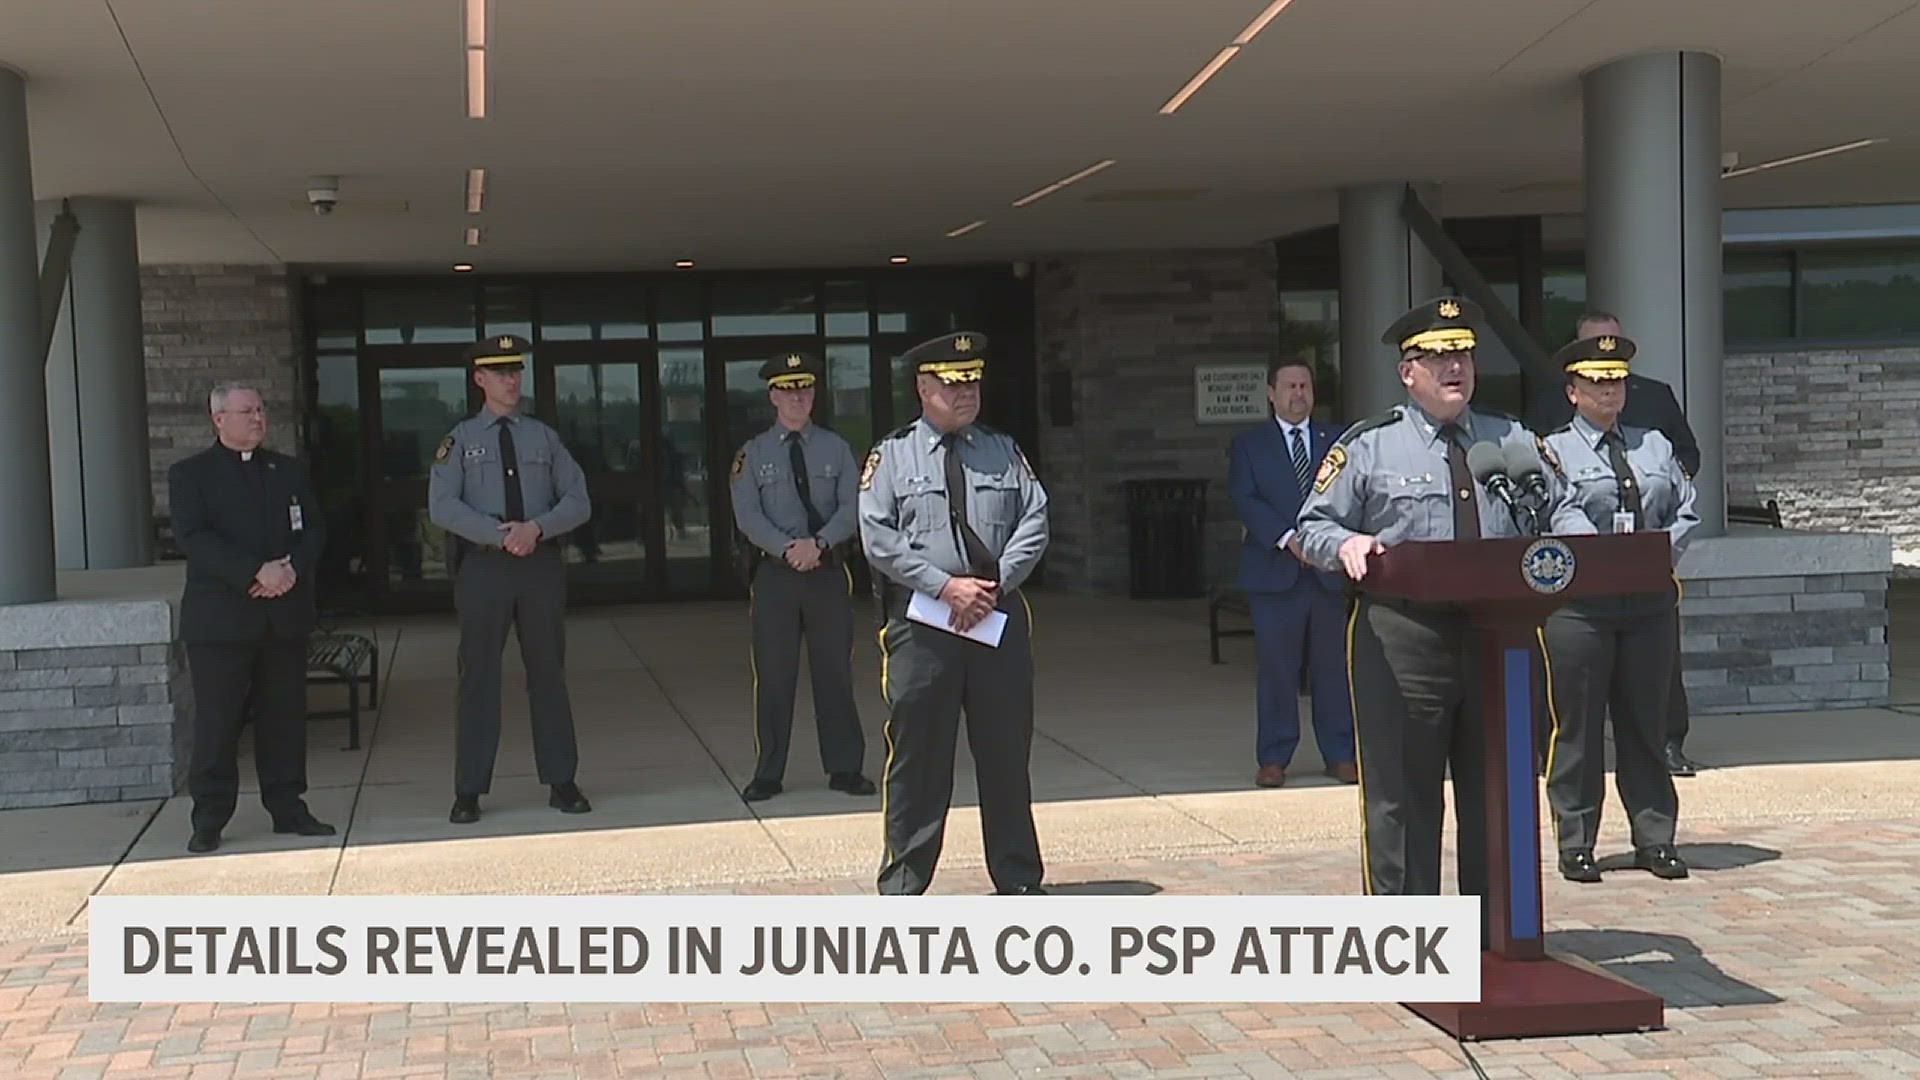 Pa. State Police revealed the names of the trooper killed, the trooper injured, and gunman, as well as a timeline of Saturday's shooting in Juniata Co.